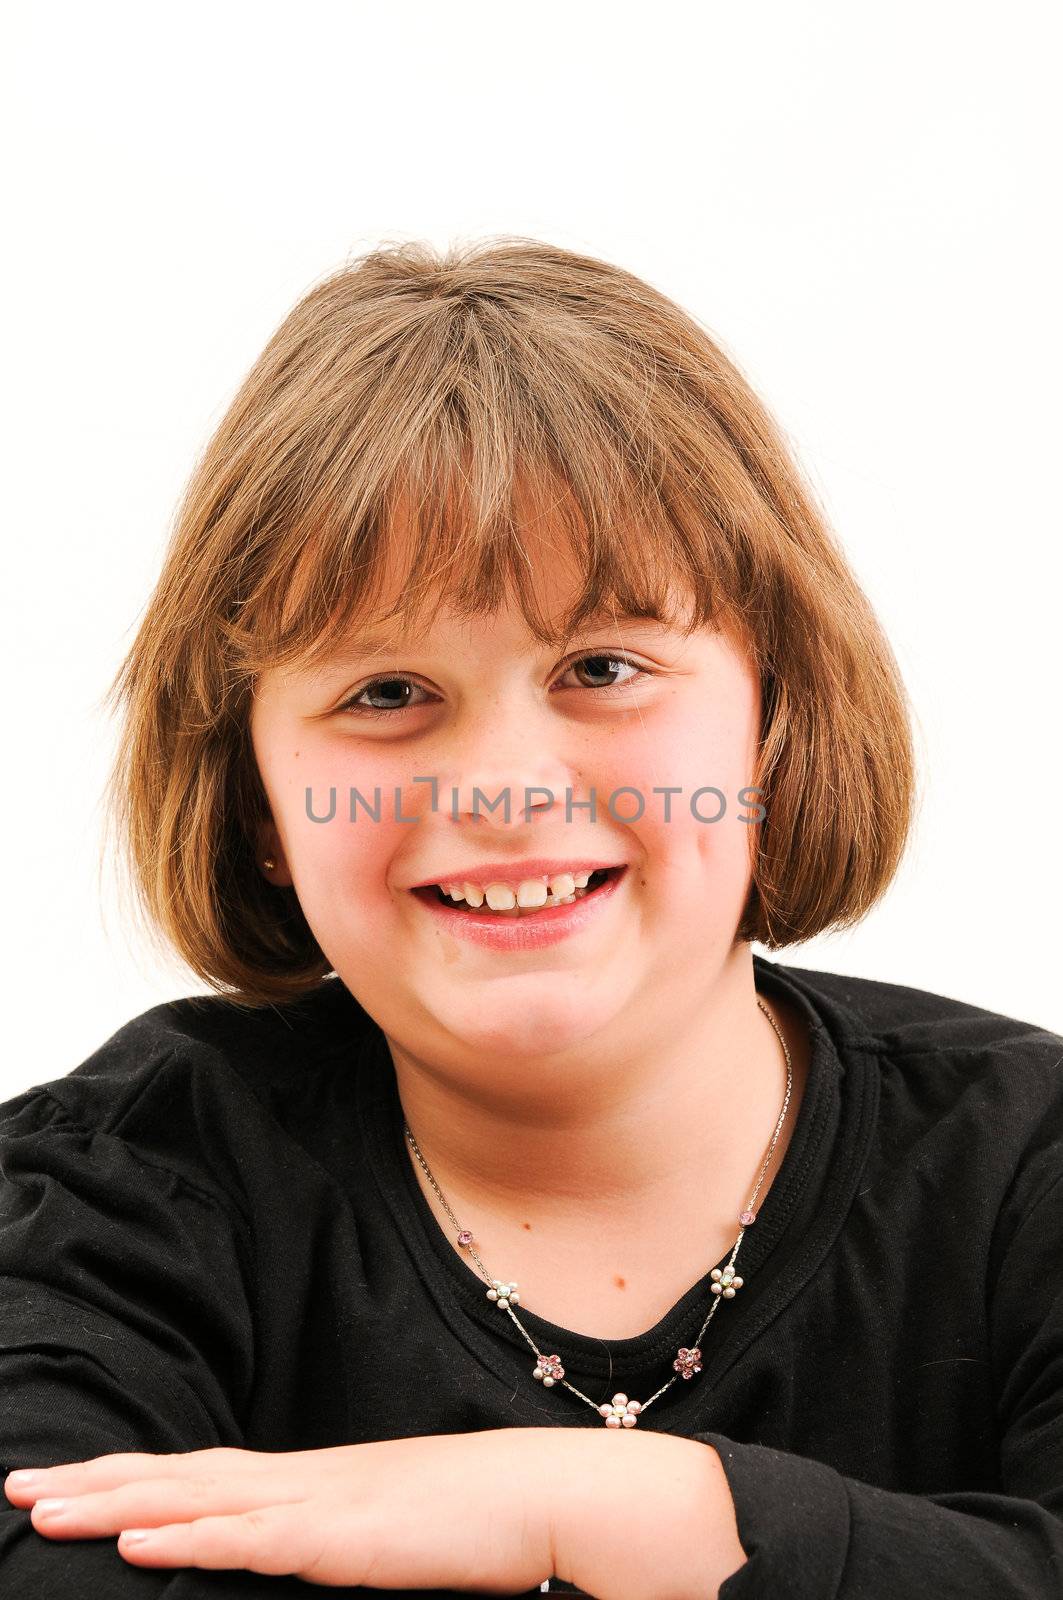 young beautiful  short brown hair teenager smiling with dimple in cheek